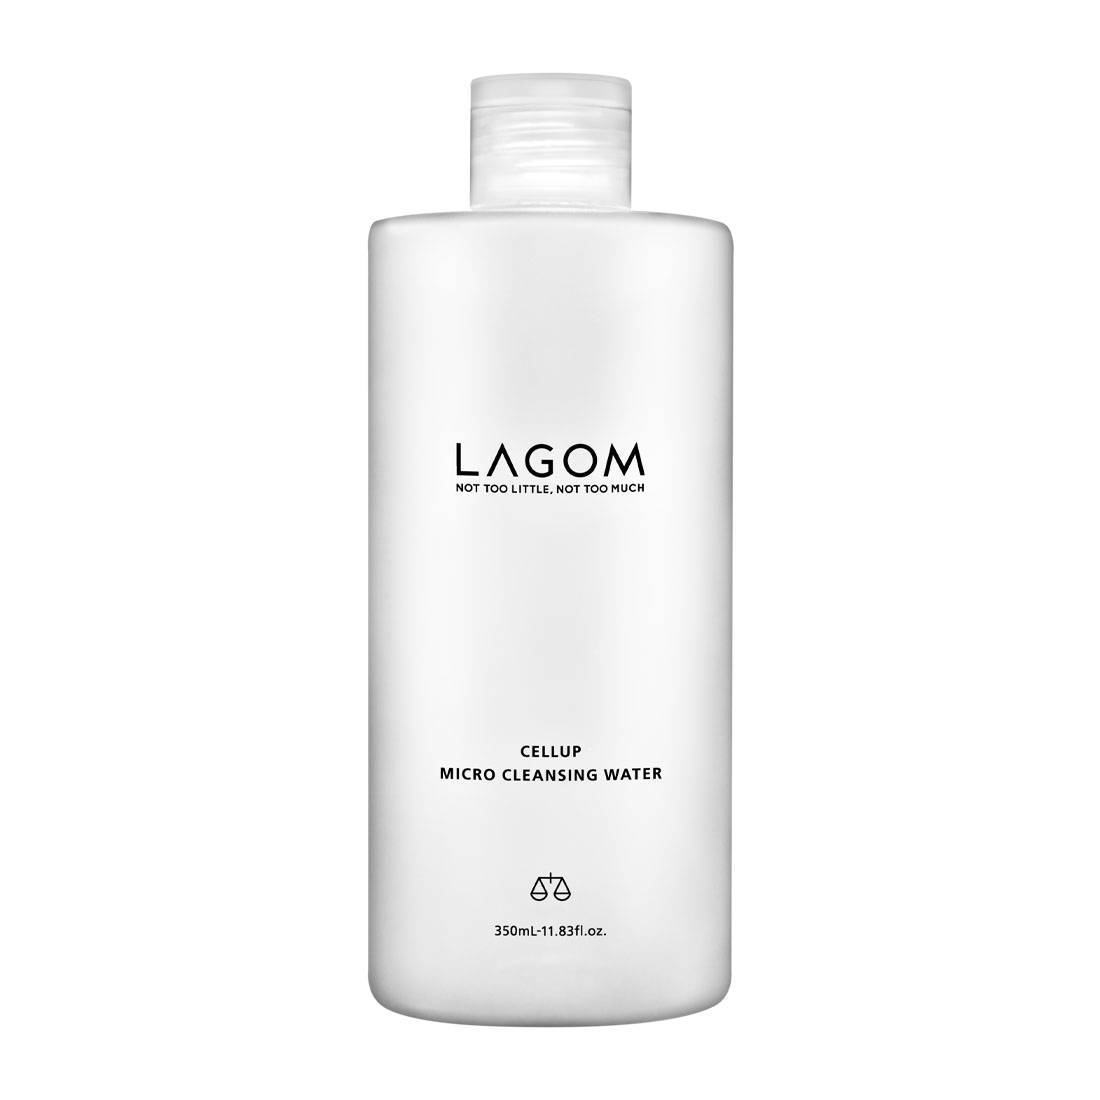 Lagom Cellup Micro Cleansing Water 350ml